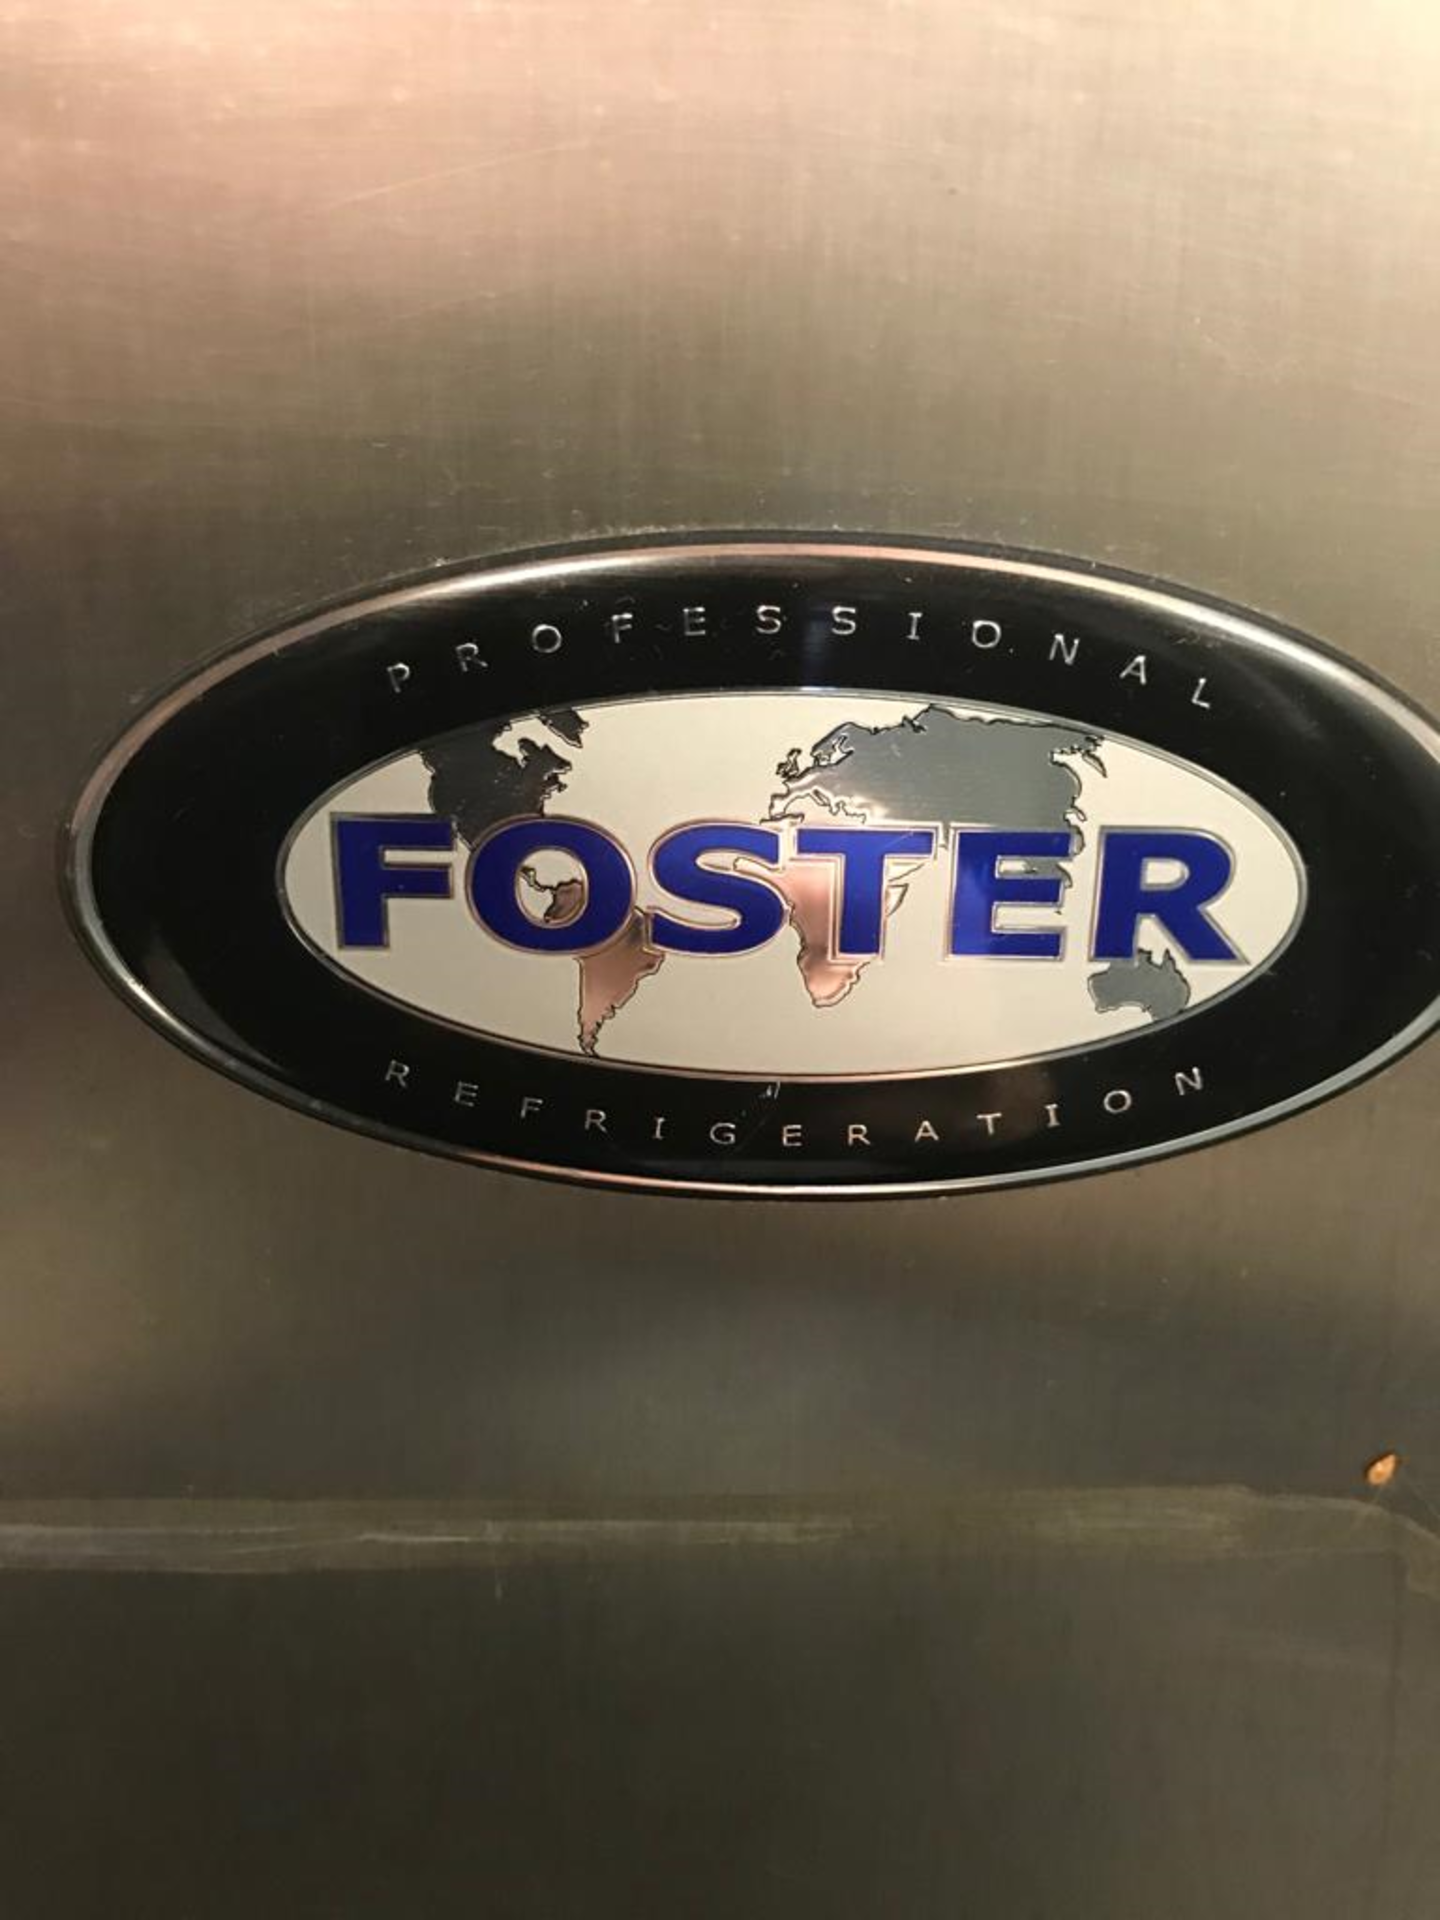 Foster Professional Refrigerator On Caster Wheels - Image 6 of 12